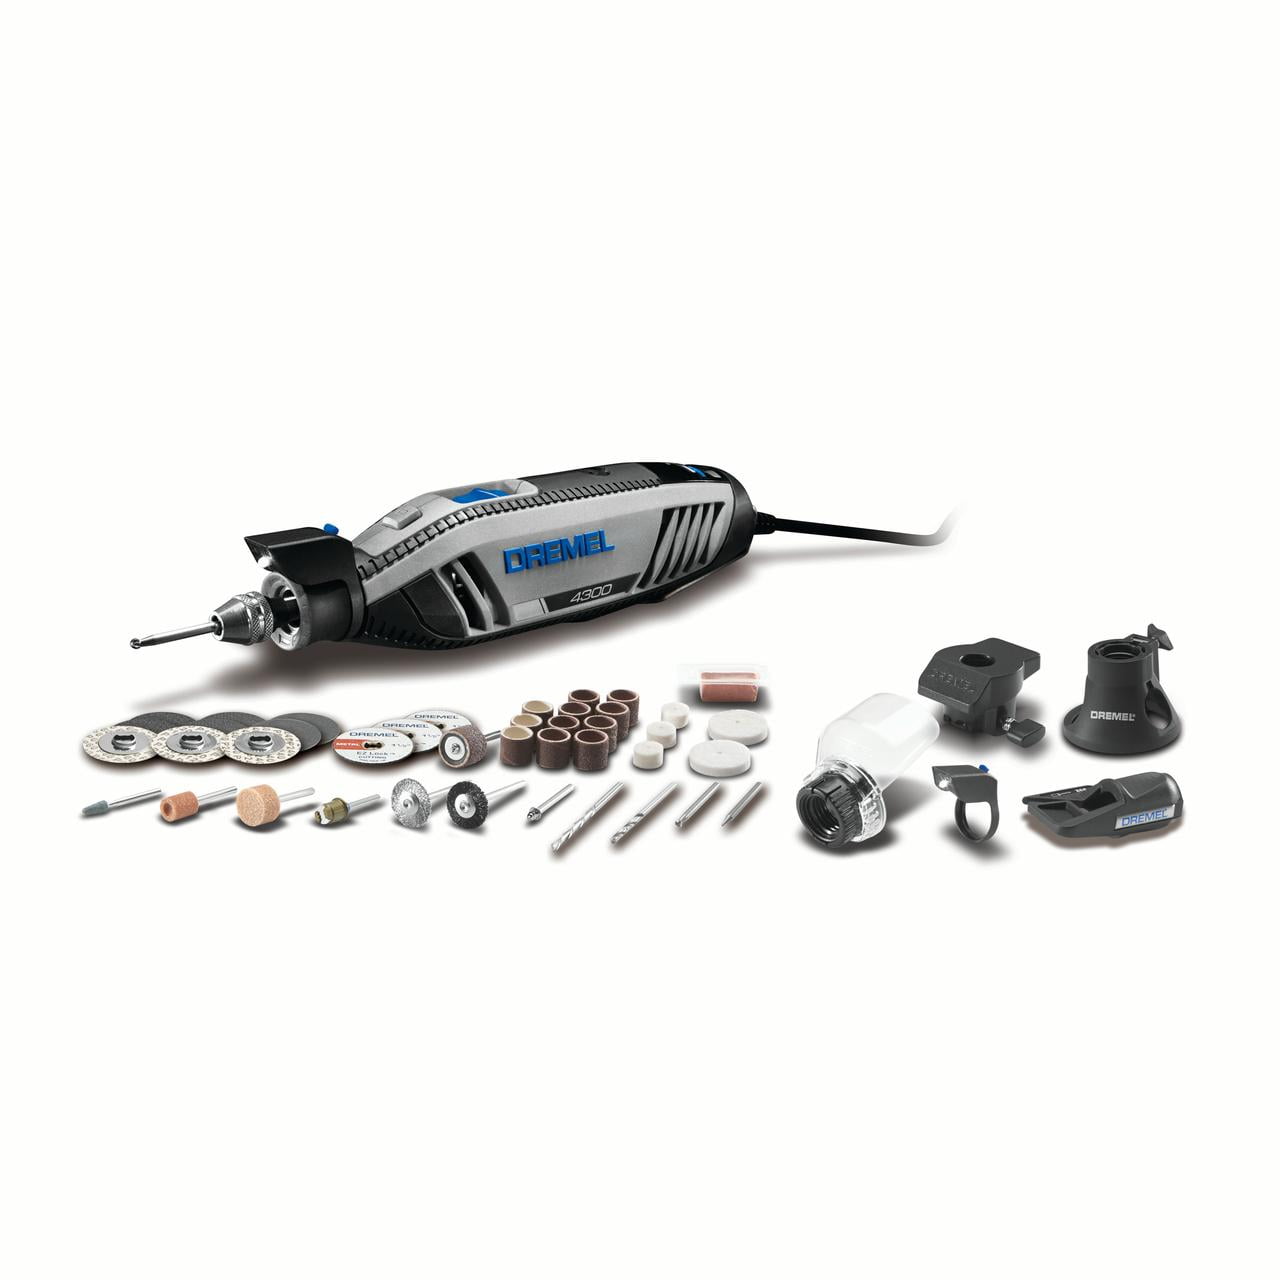 Dremel 4000-6/50 Rotary Tool Kit with Attachments and Carrying Case 